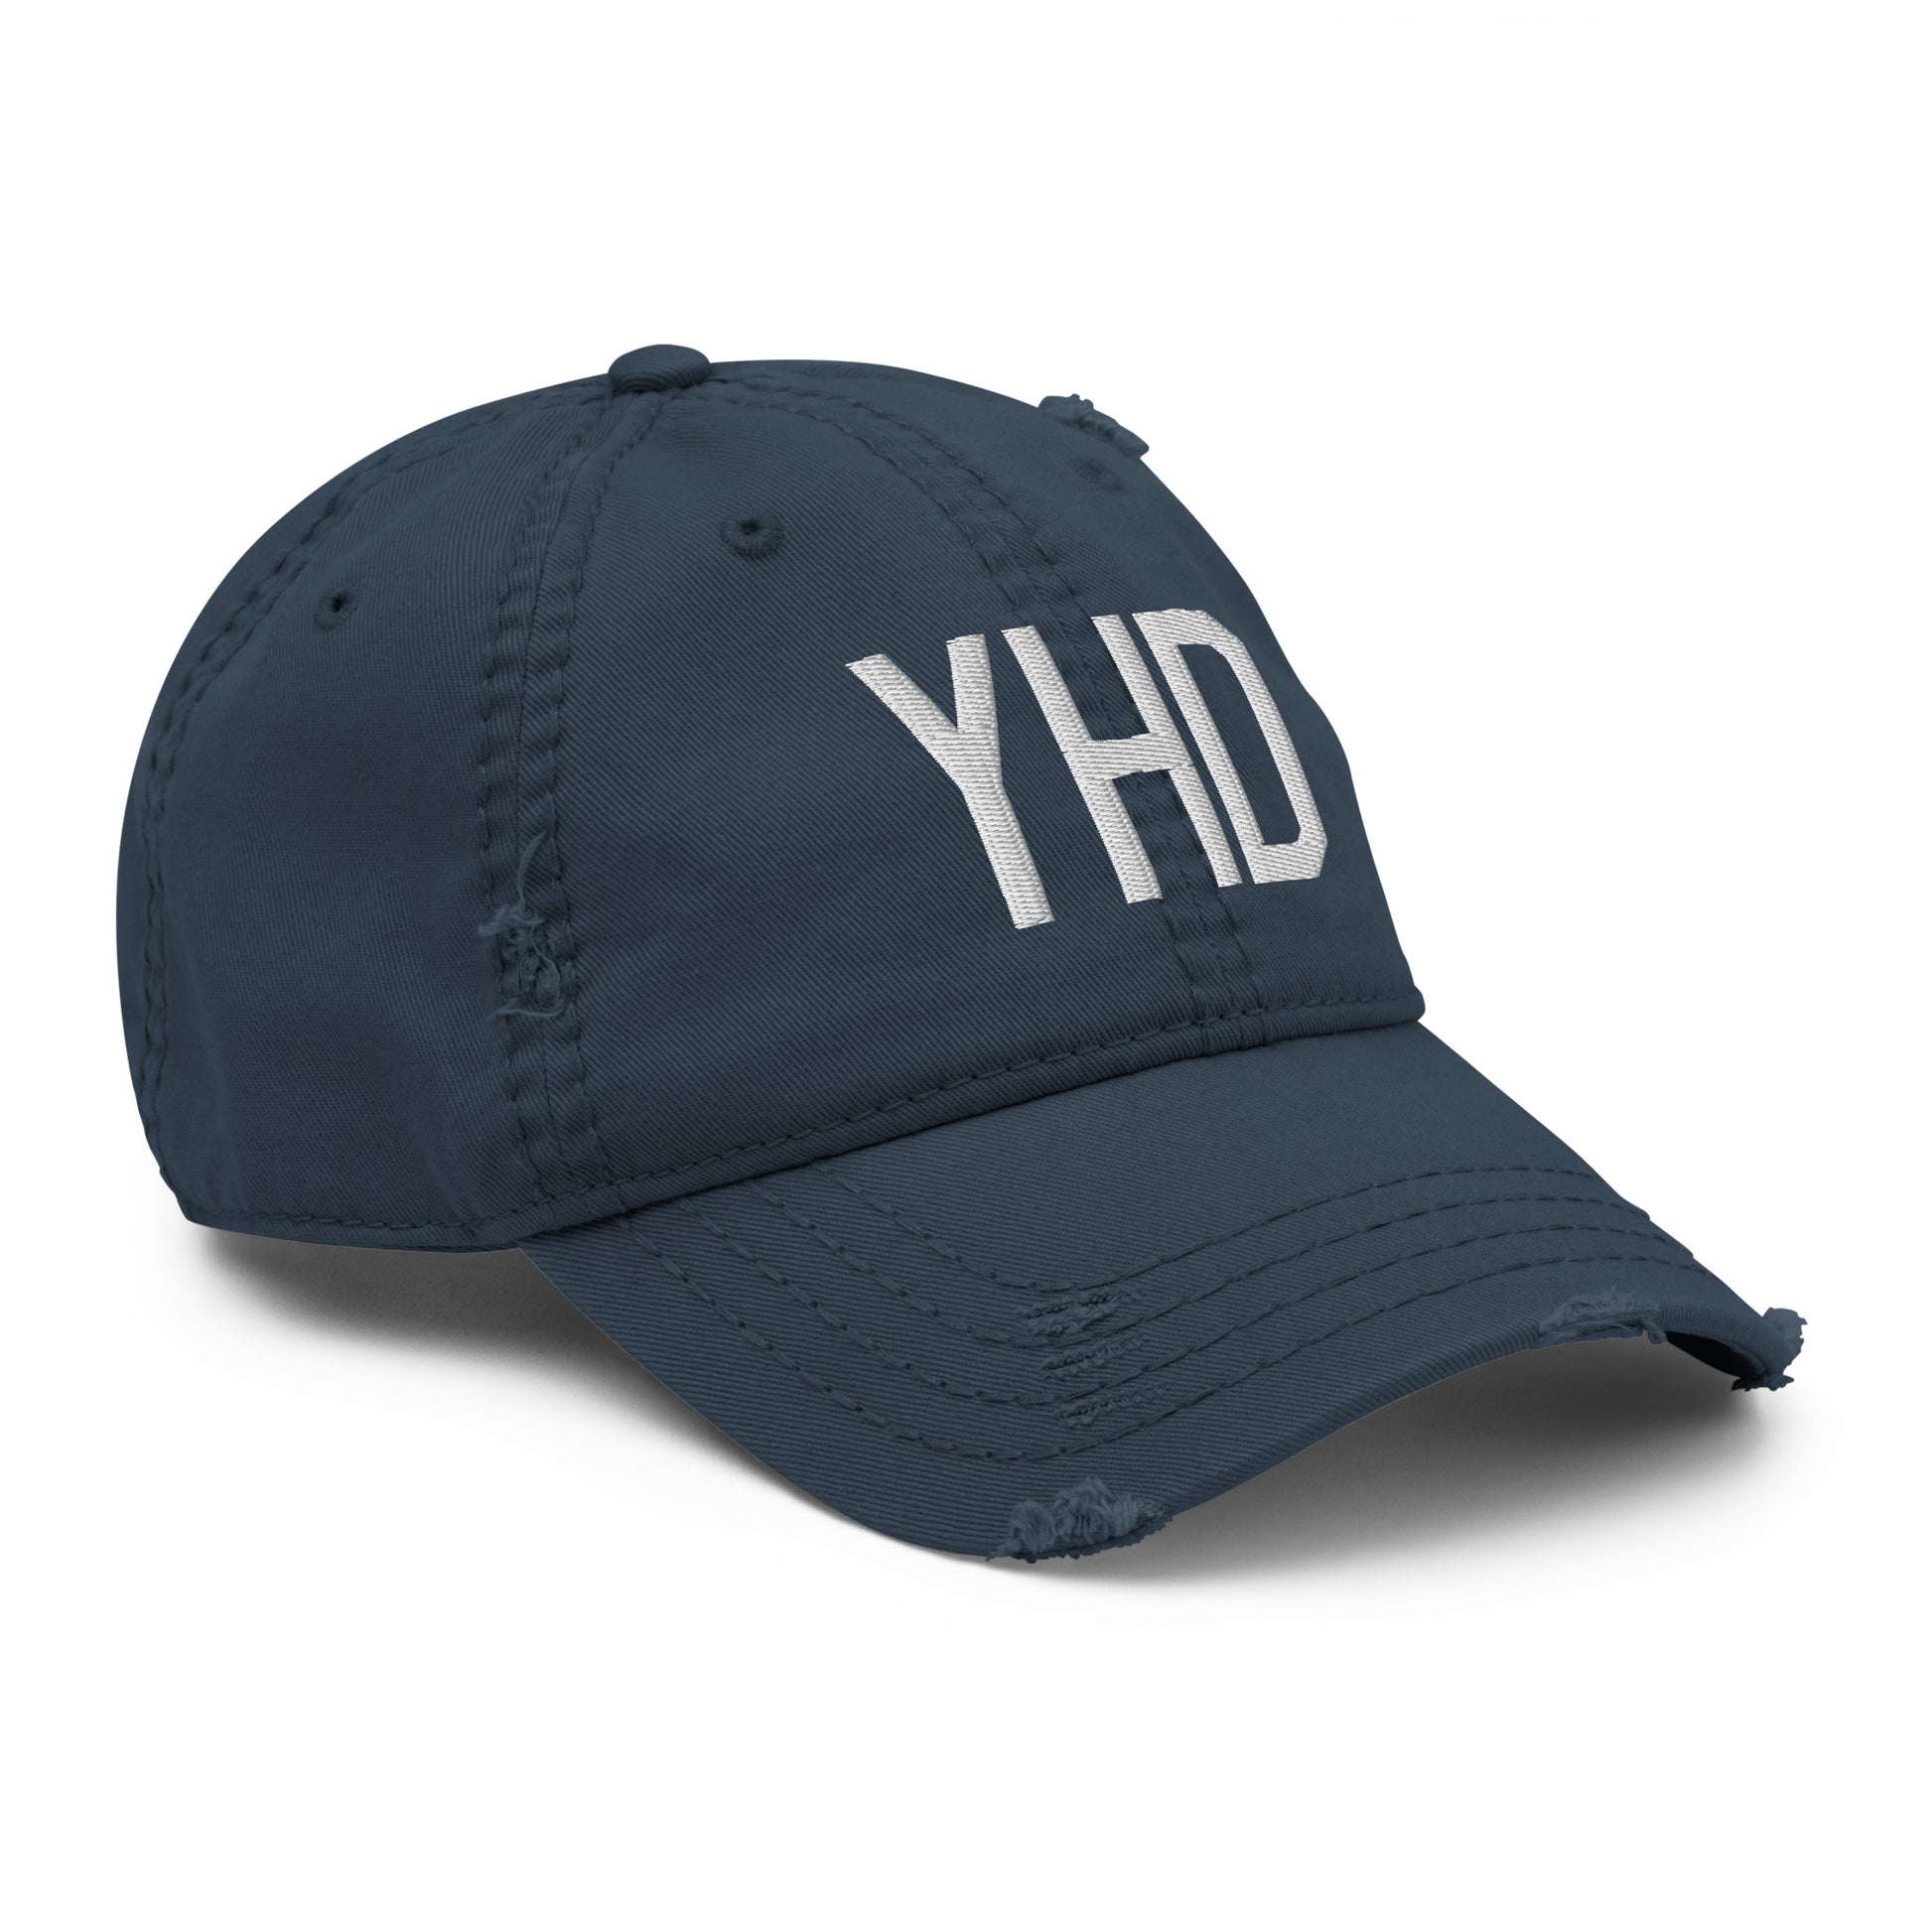 Airport Code Distressed Hat - White • YHD Dryden • YHM Designs - Image 14